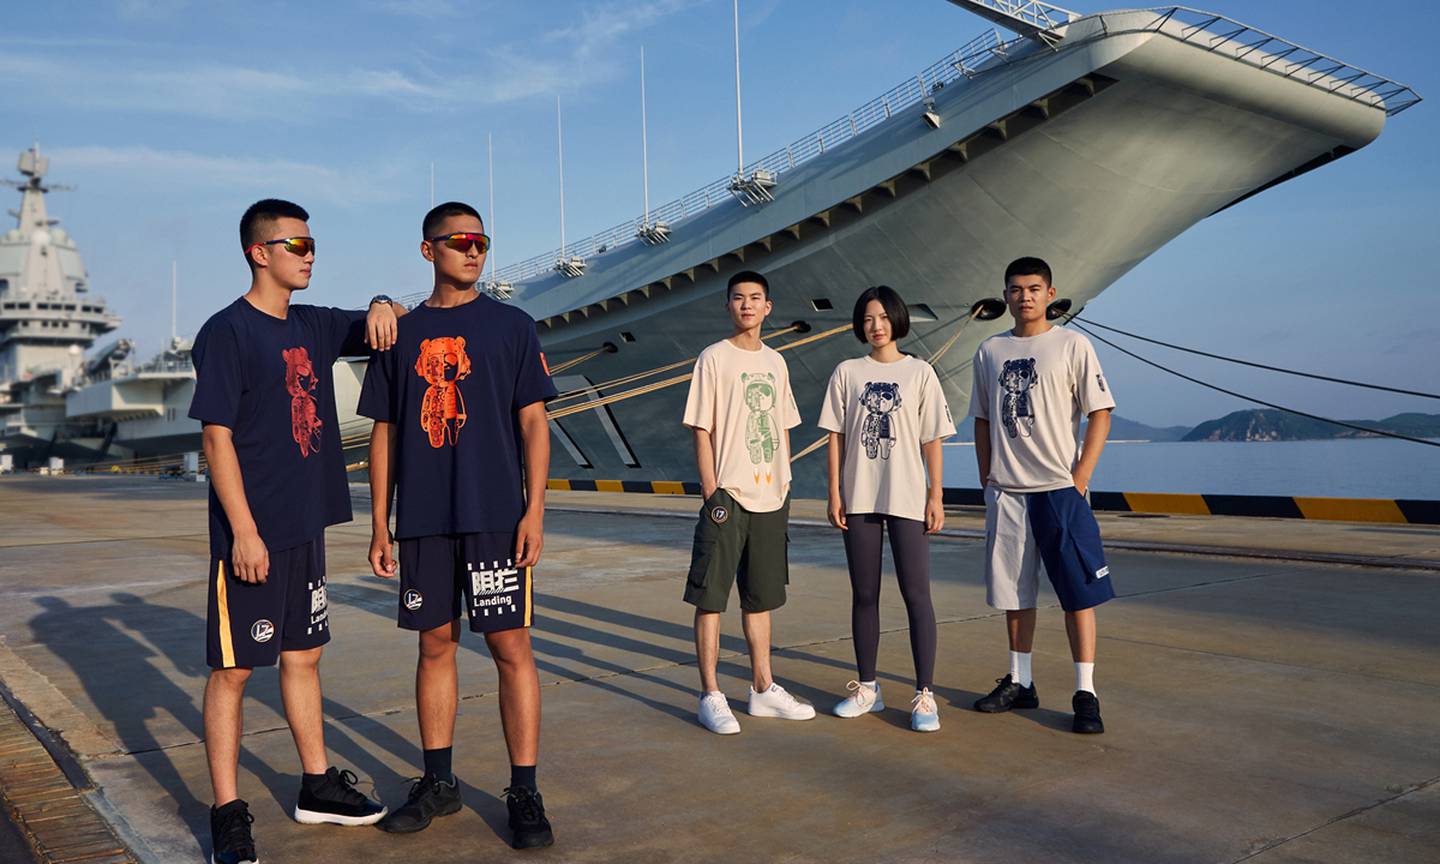 China's navy launched an apparel line to commemorate a homegrown aircraft carrier. Glory Made